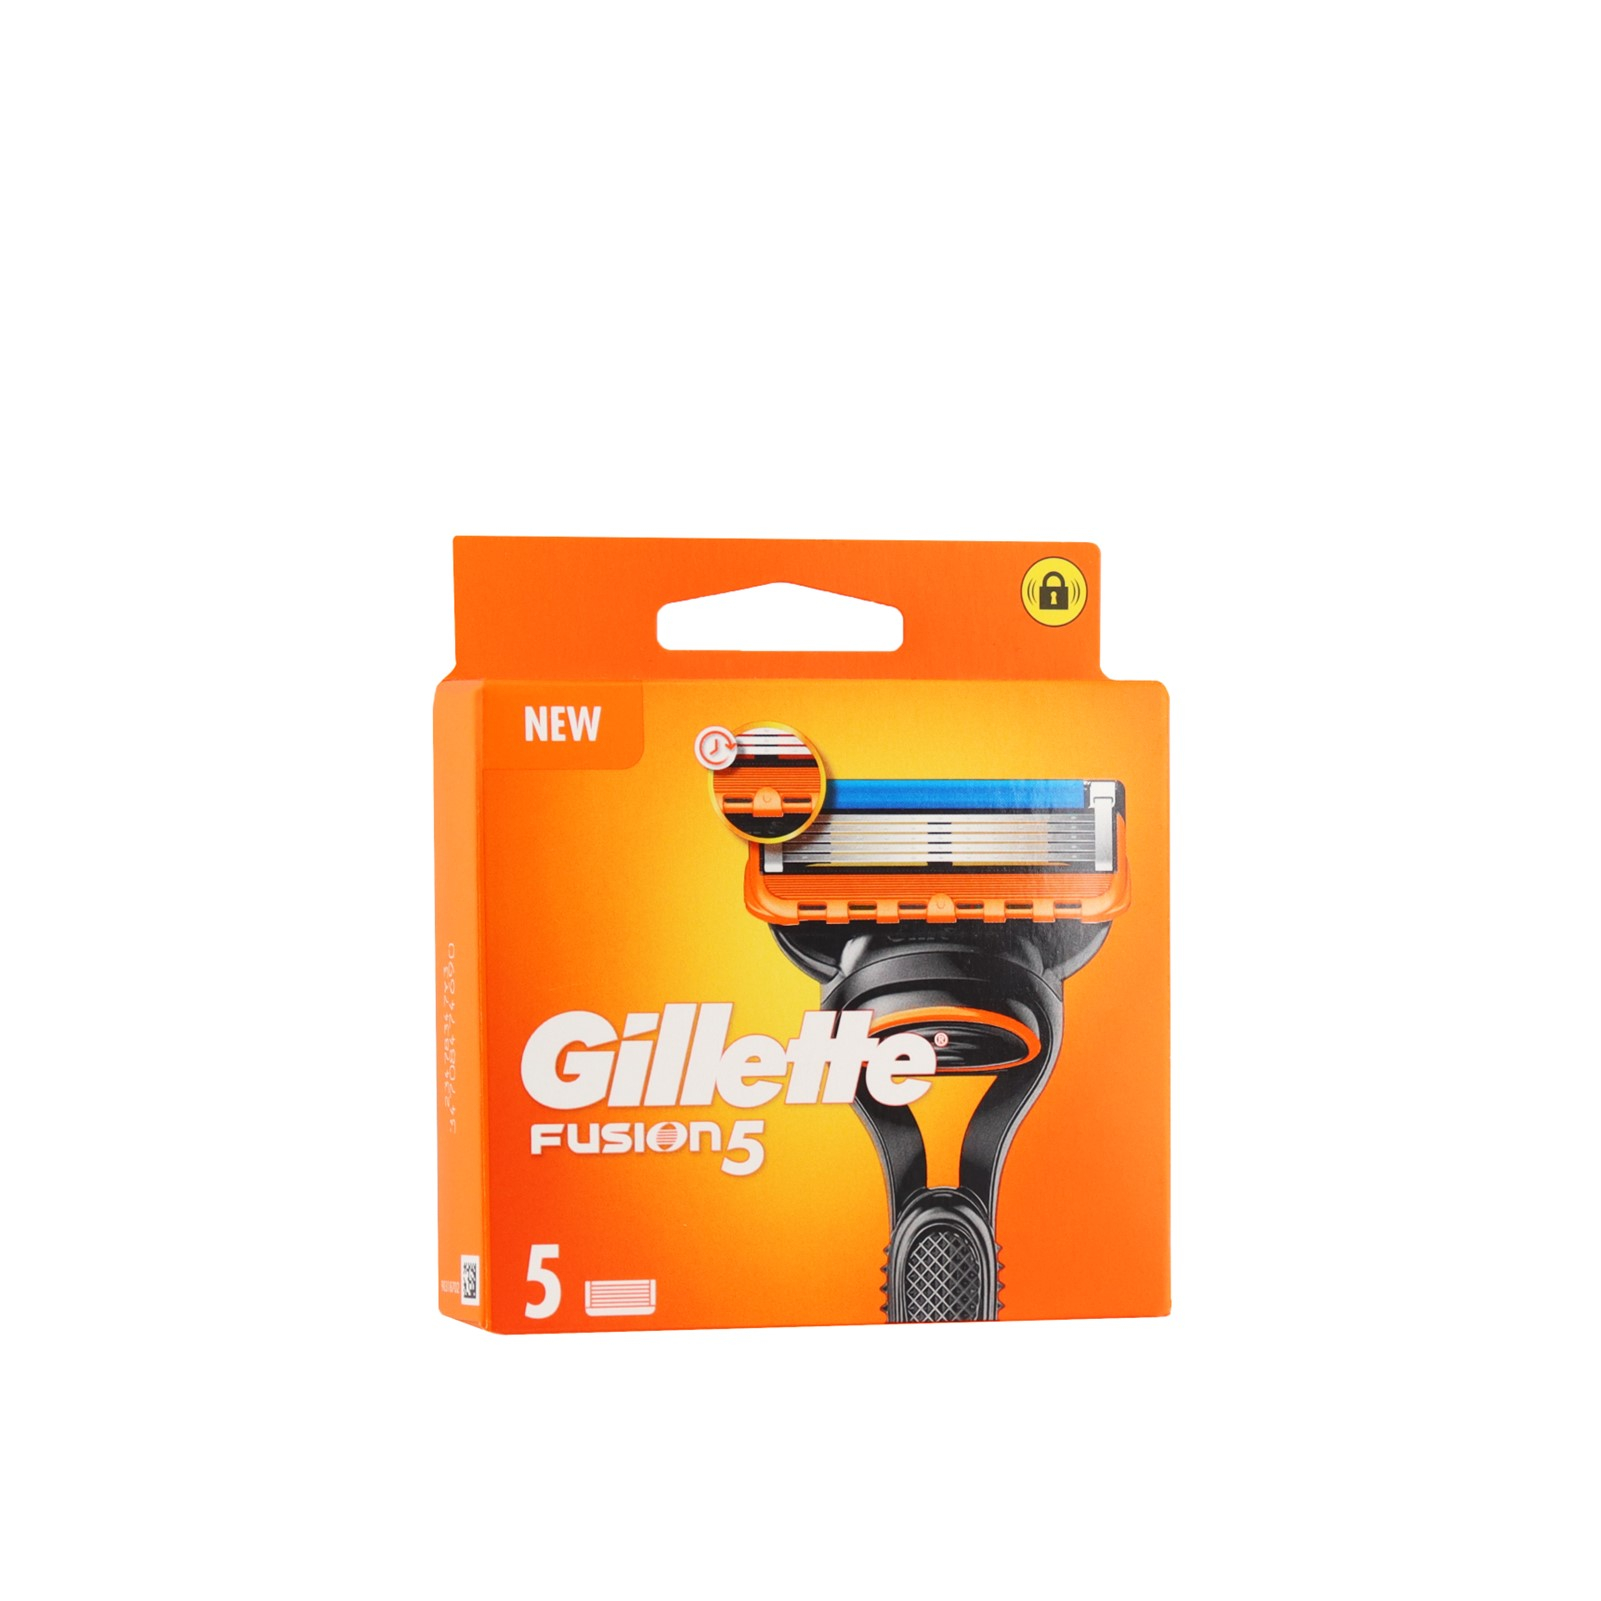 https://static.beautytocare.com/media/catalog/product/g/i/gillette-fusion-5-replacement-blades-x5.jpg